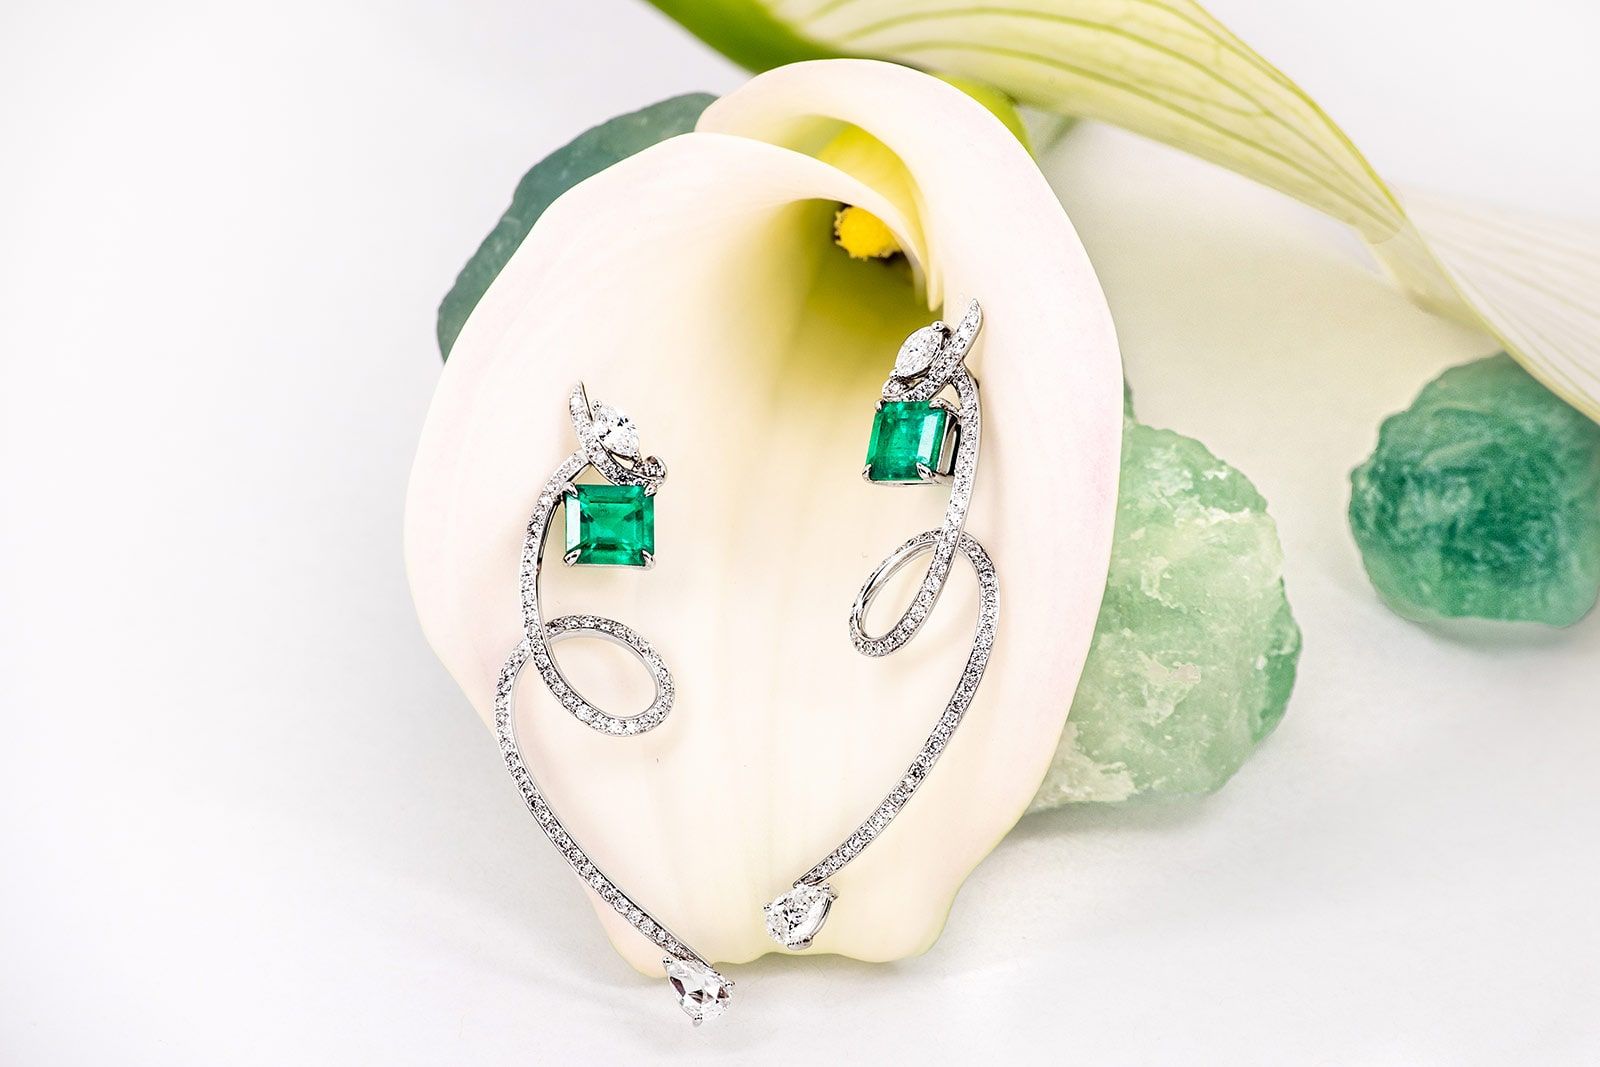 Qiu Fine Jewelry earrings with 4.60 carats of Colombian emeralds and diamonds